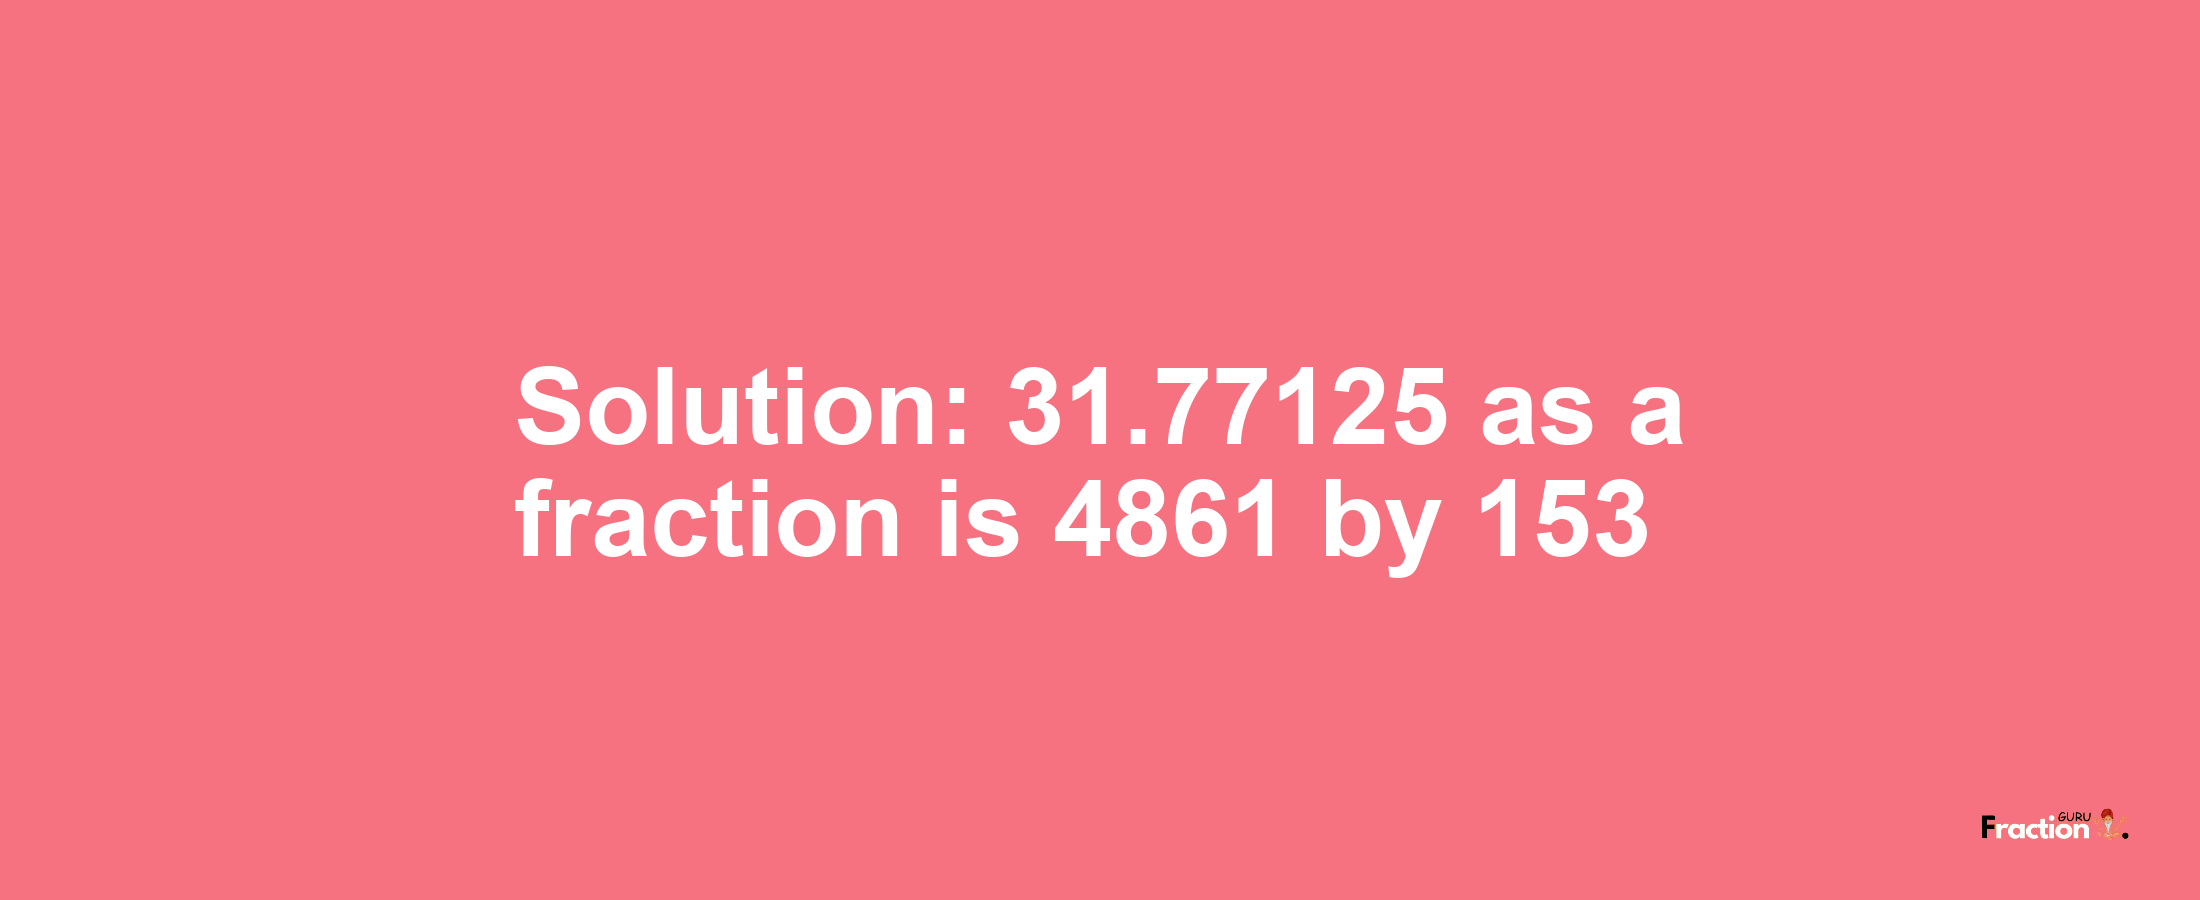 Solution:31.77125 as a fraction is 4861/153